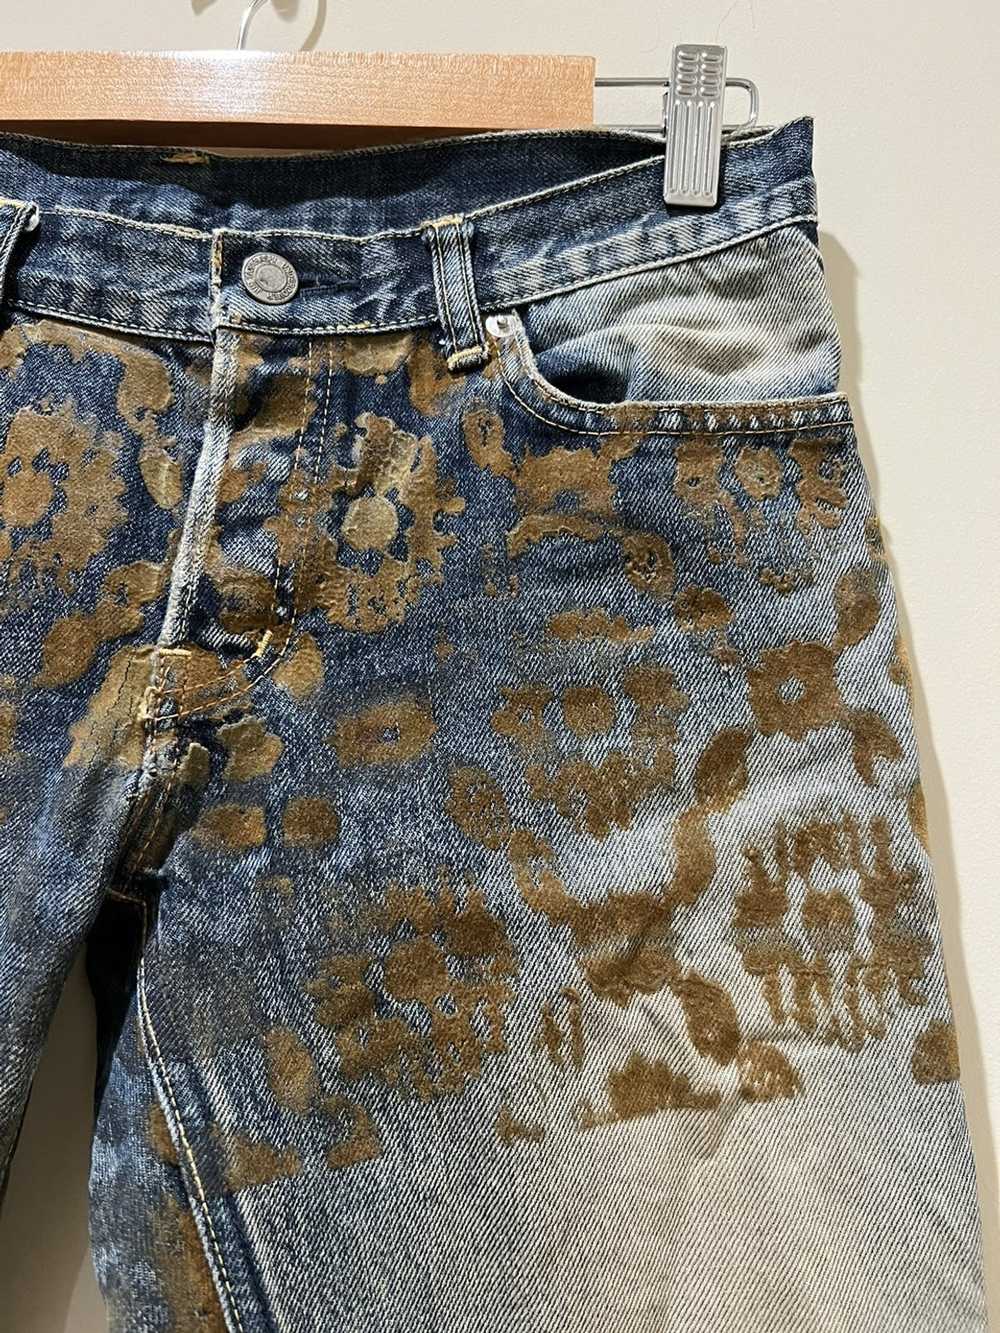 Undercover Undercover Printed Denim Jeans - image 3